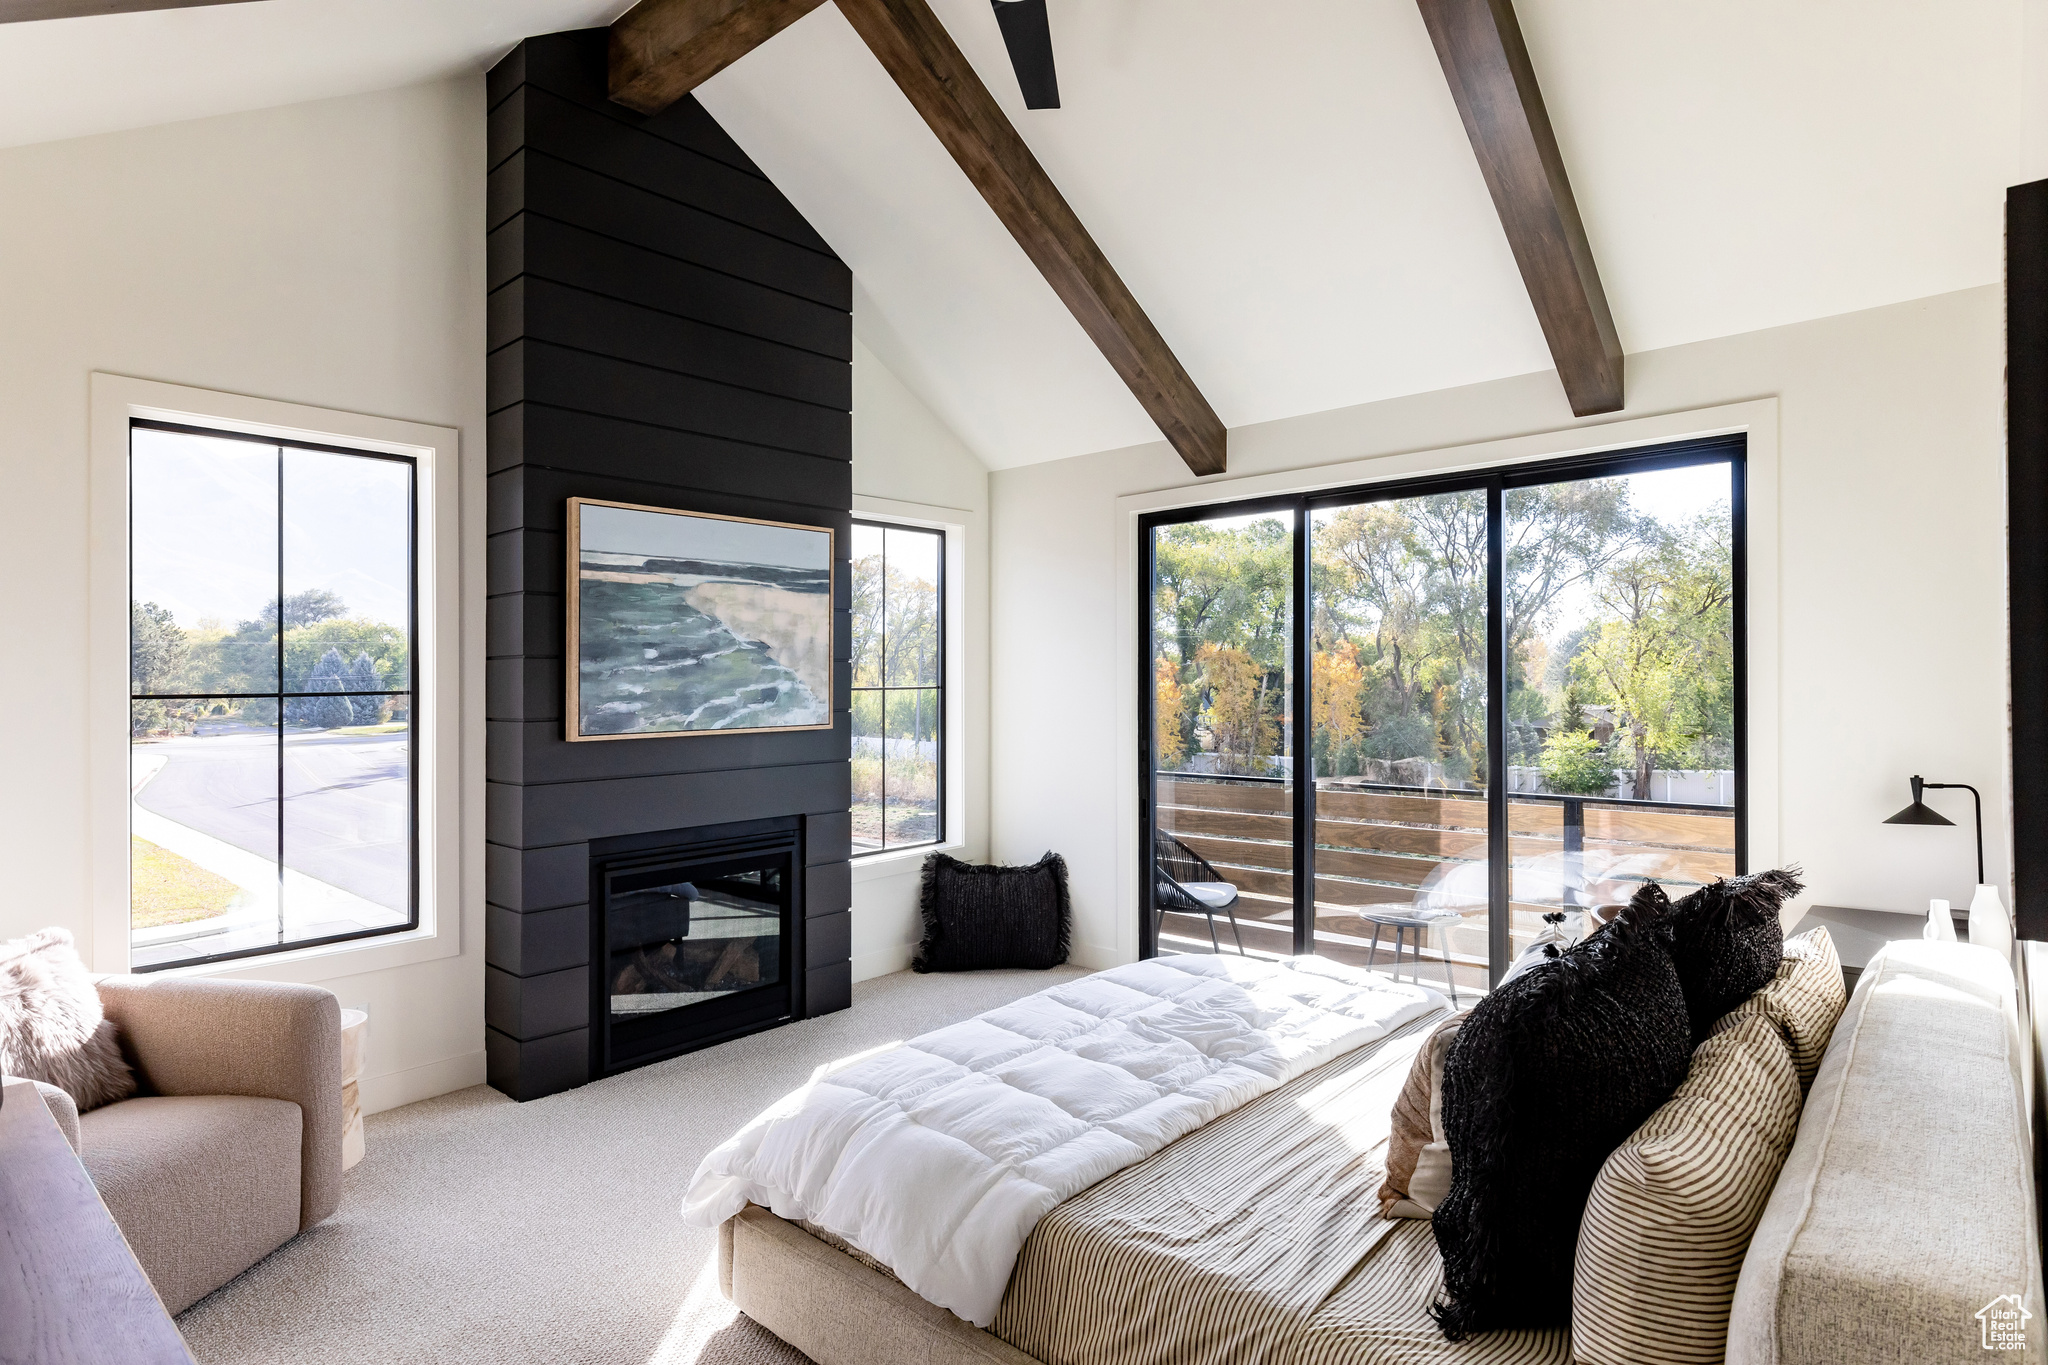 Carpeted bedroom featuring high vaulted ceiling, a fireplace, beam ceiling, and multiple windows